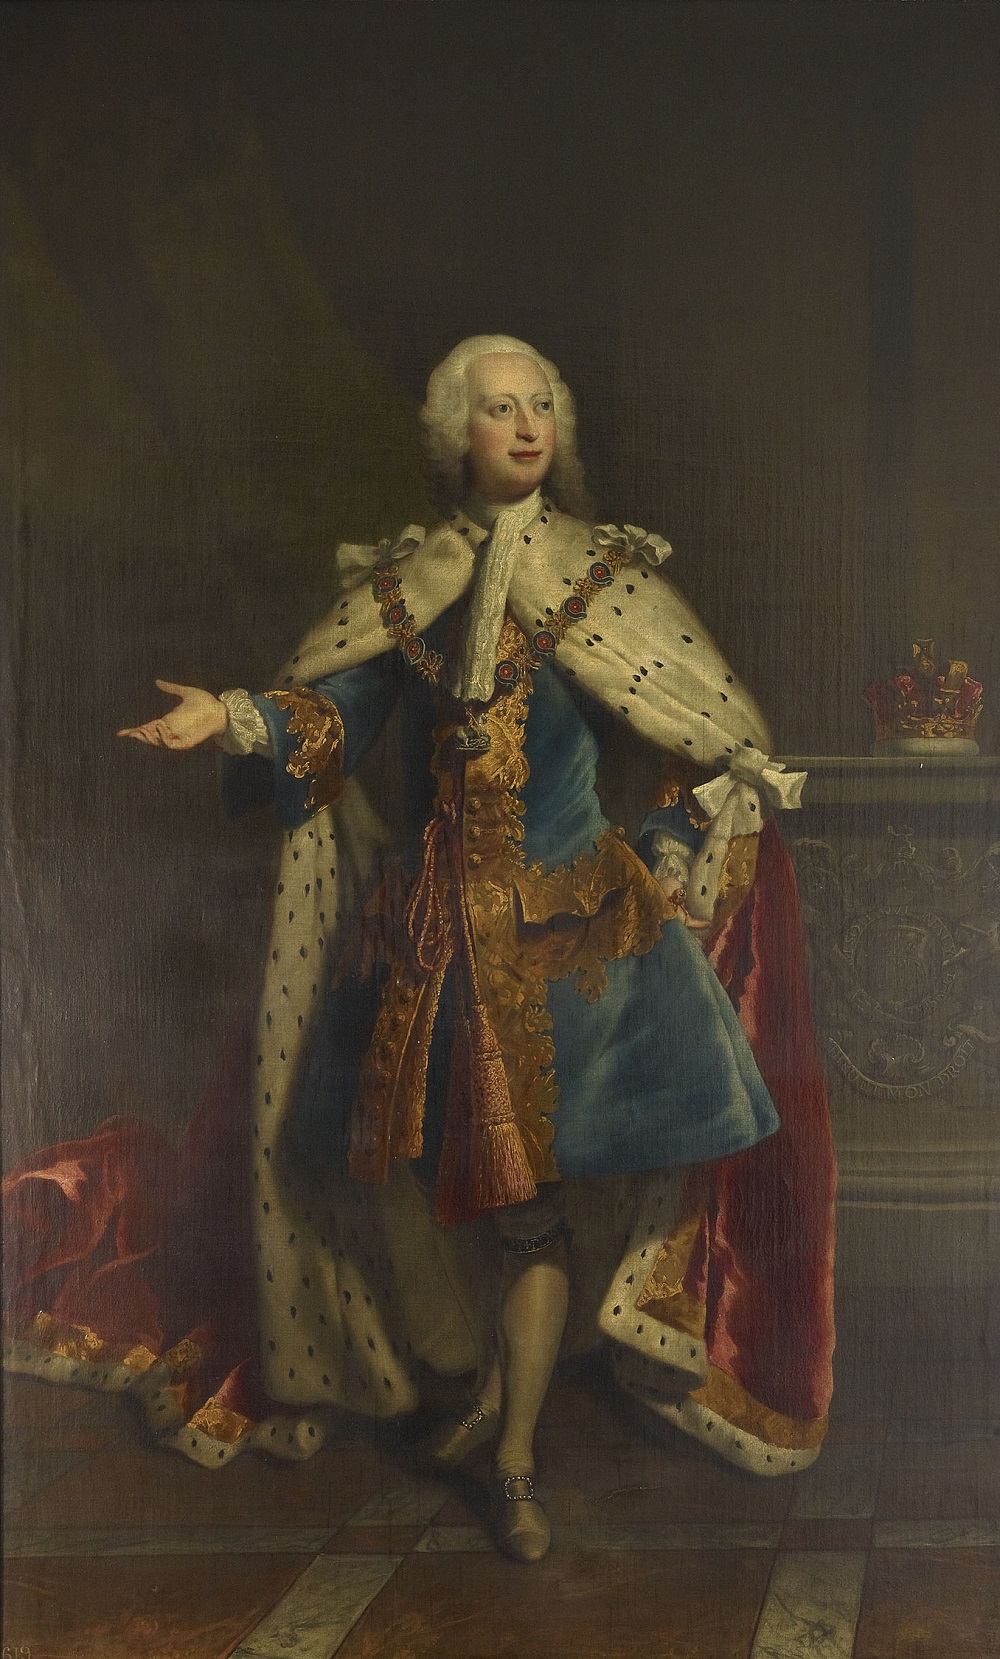 Portrait of Frederick, Prince of Wales by Highmore